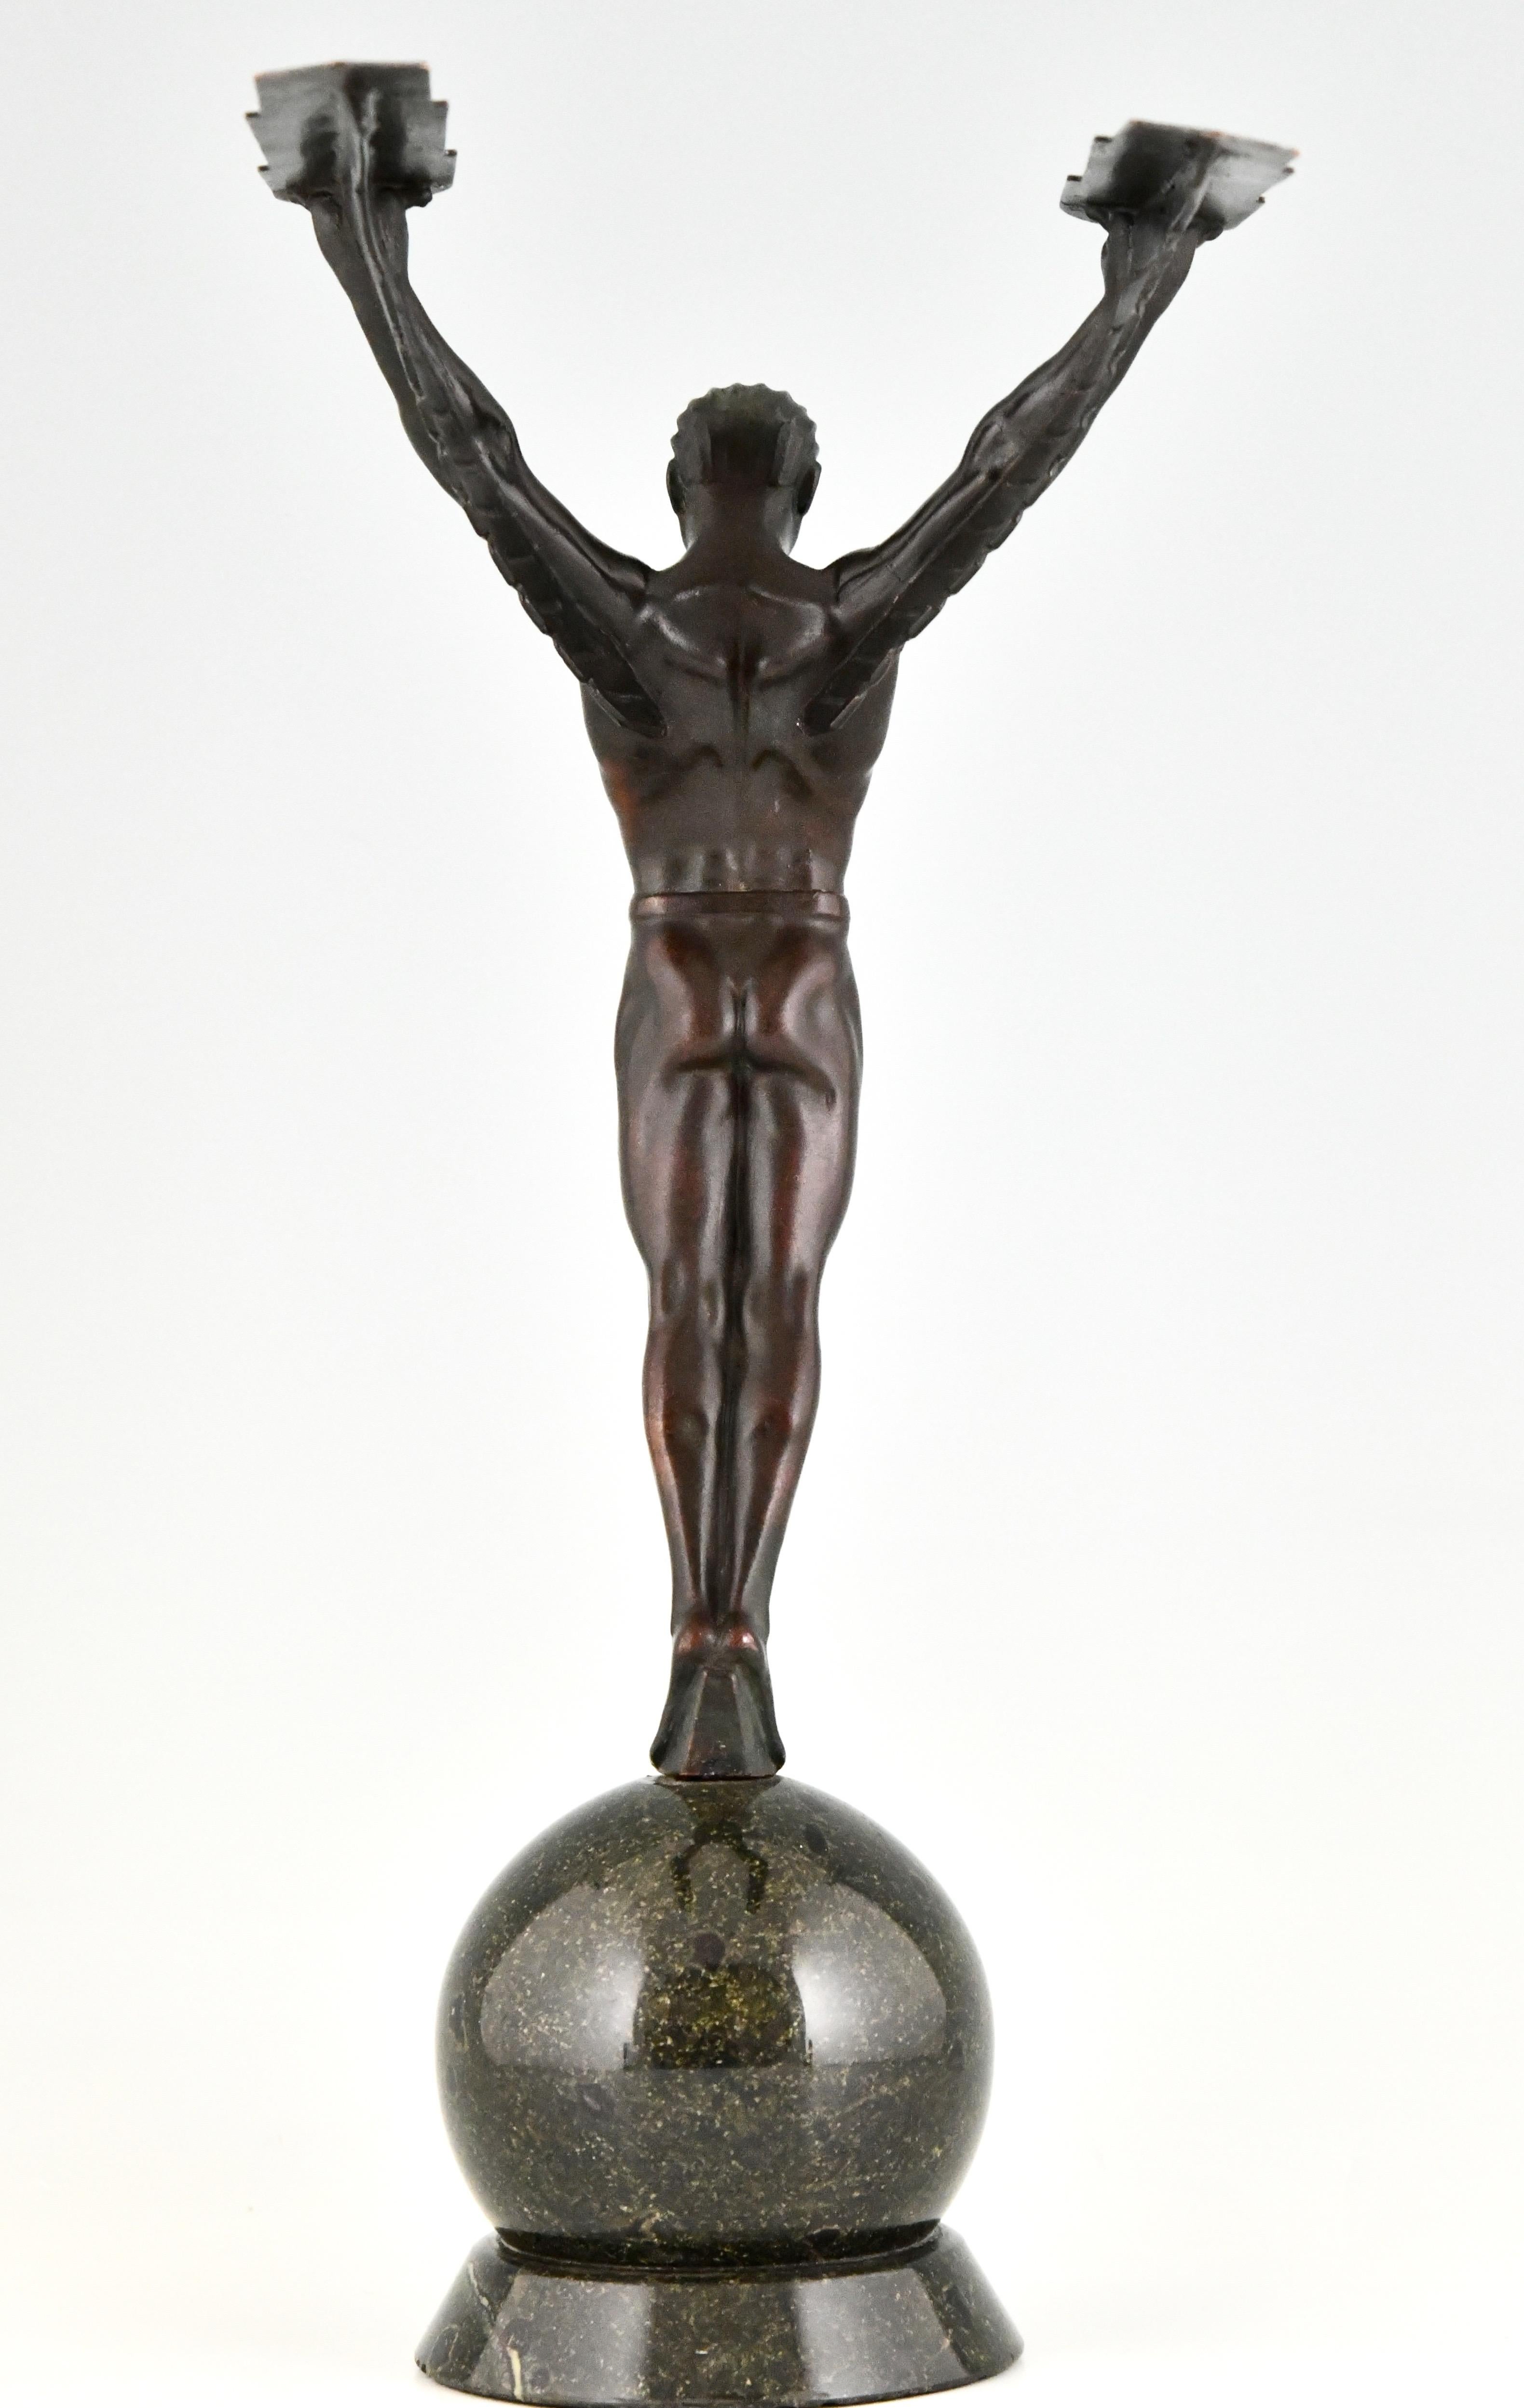 Patinated Icarus Art Deco Sculpture of a Winged Athlete in the Style of Schmidt Hofer